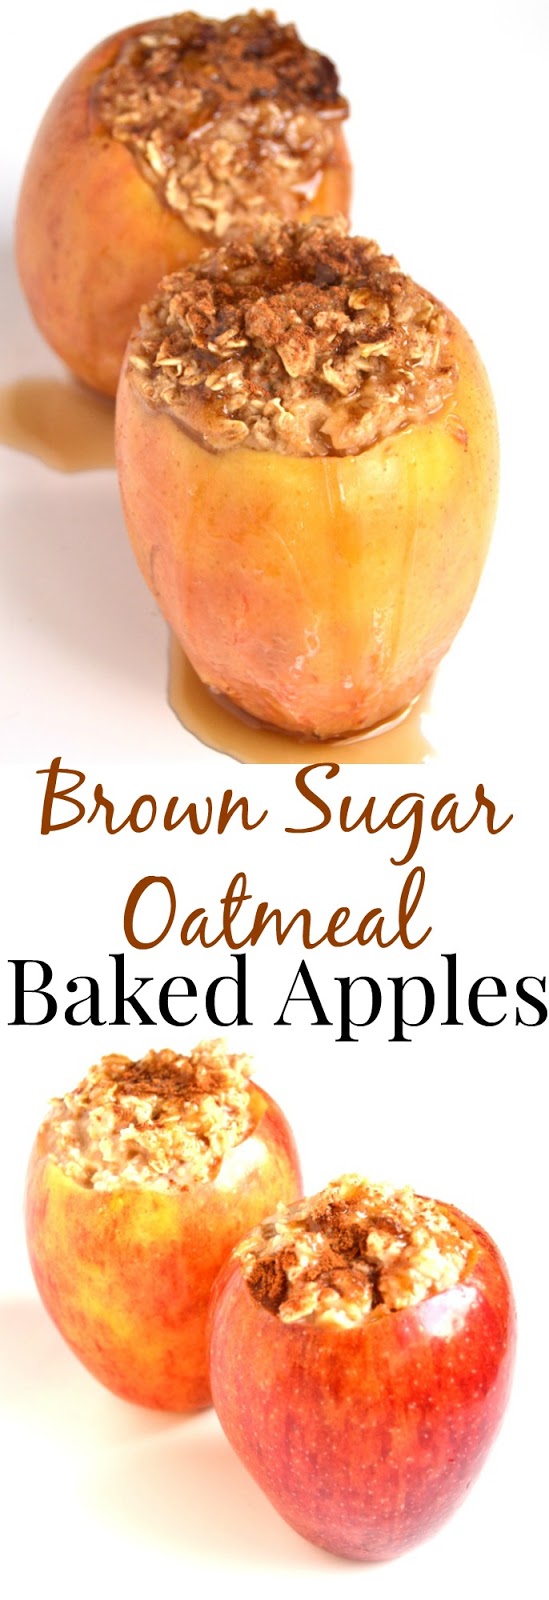 Brown Sugar Oatmeal Baked Apples are the perfect warm and filling breakfast! They taste like dessert but are healthy enough to eat anytime. www.nutritionistreviews.com